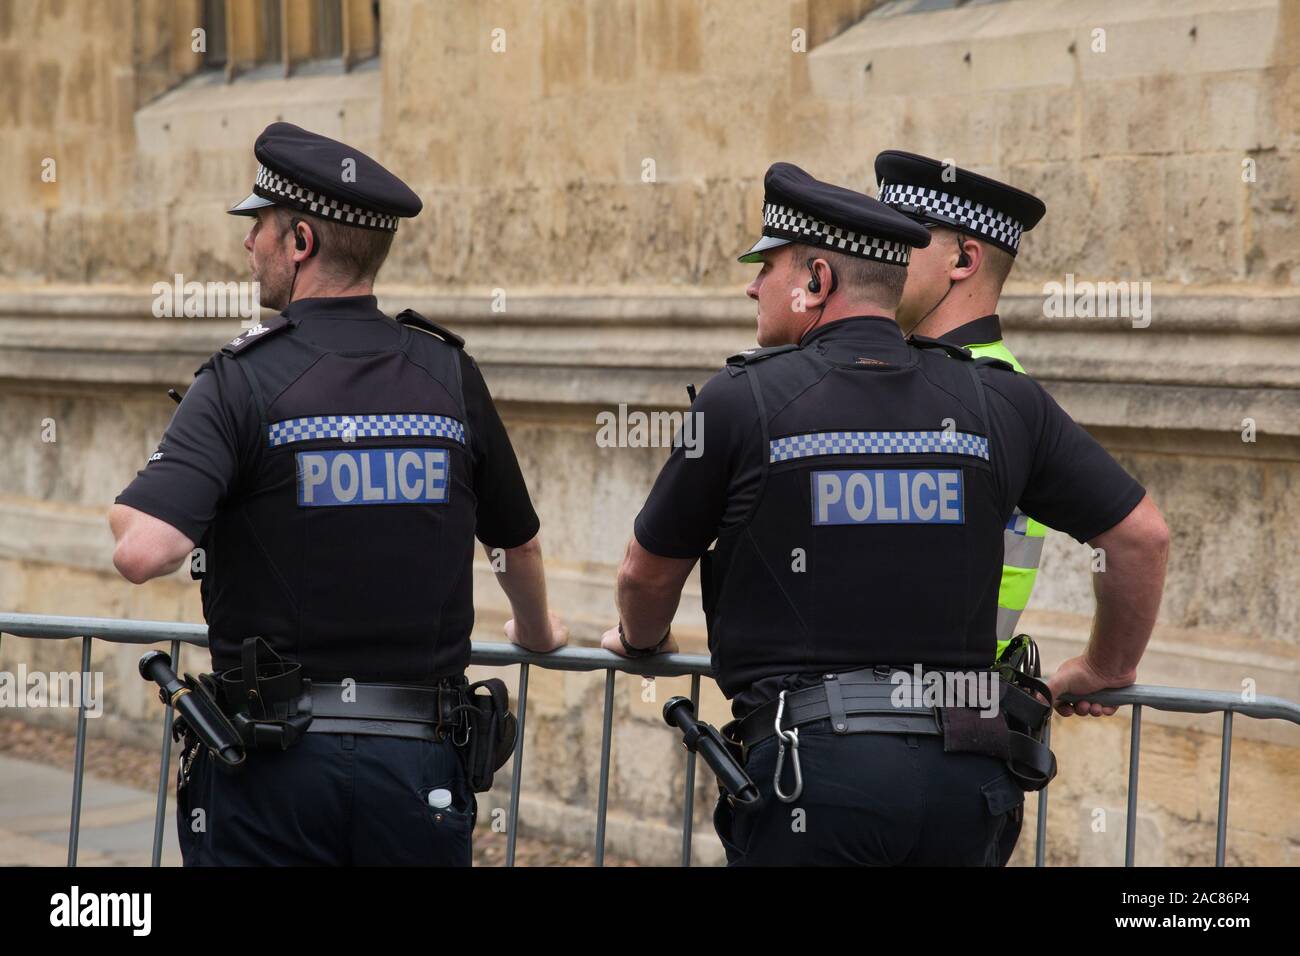 Three uniformed police officers in short sleeves wearing caps with earpieces and wearing utility belts with truncheons supervise a demonstration Stock Photo